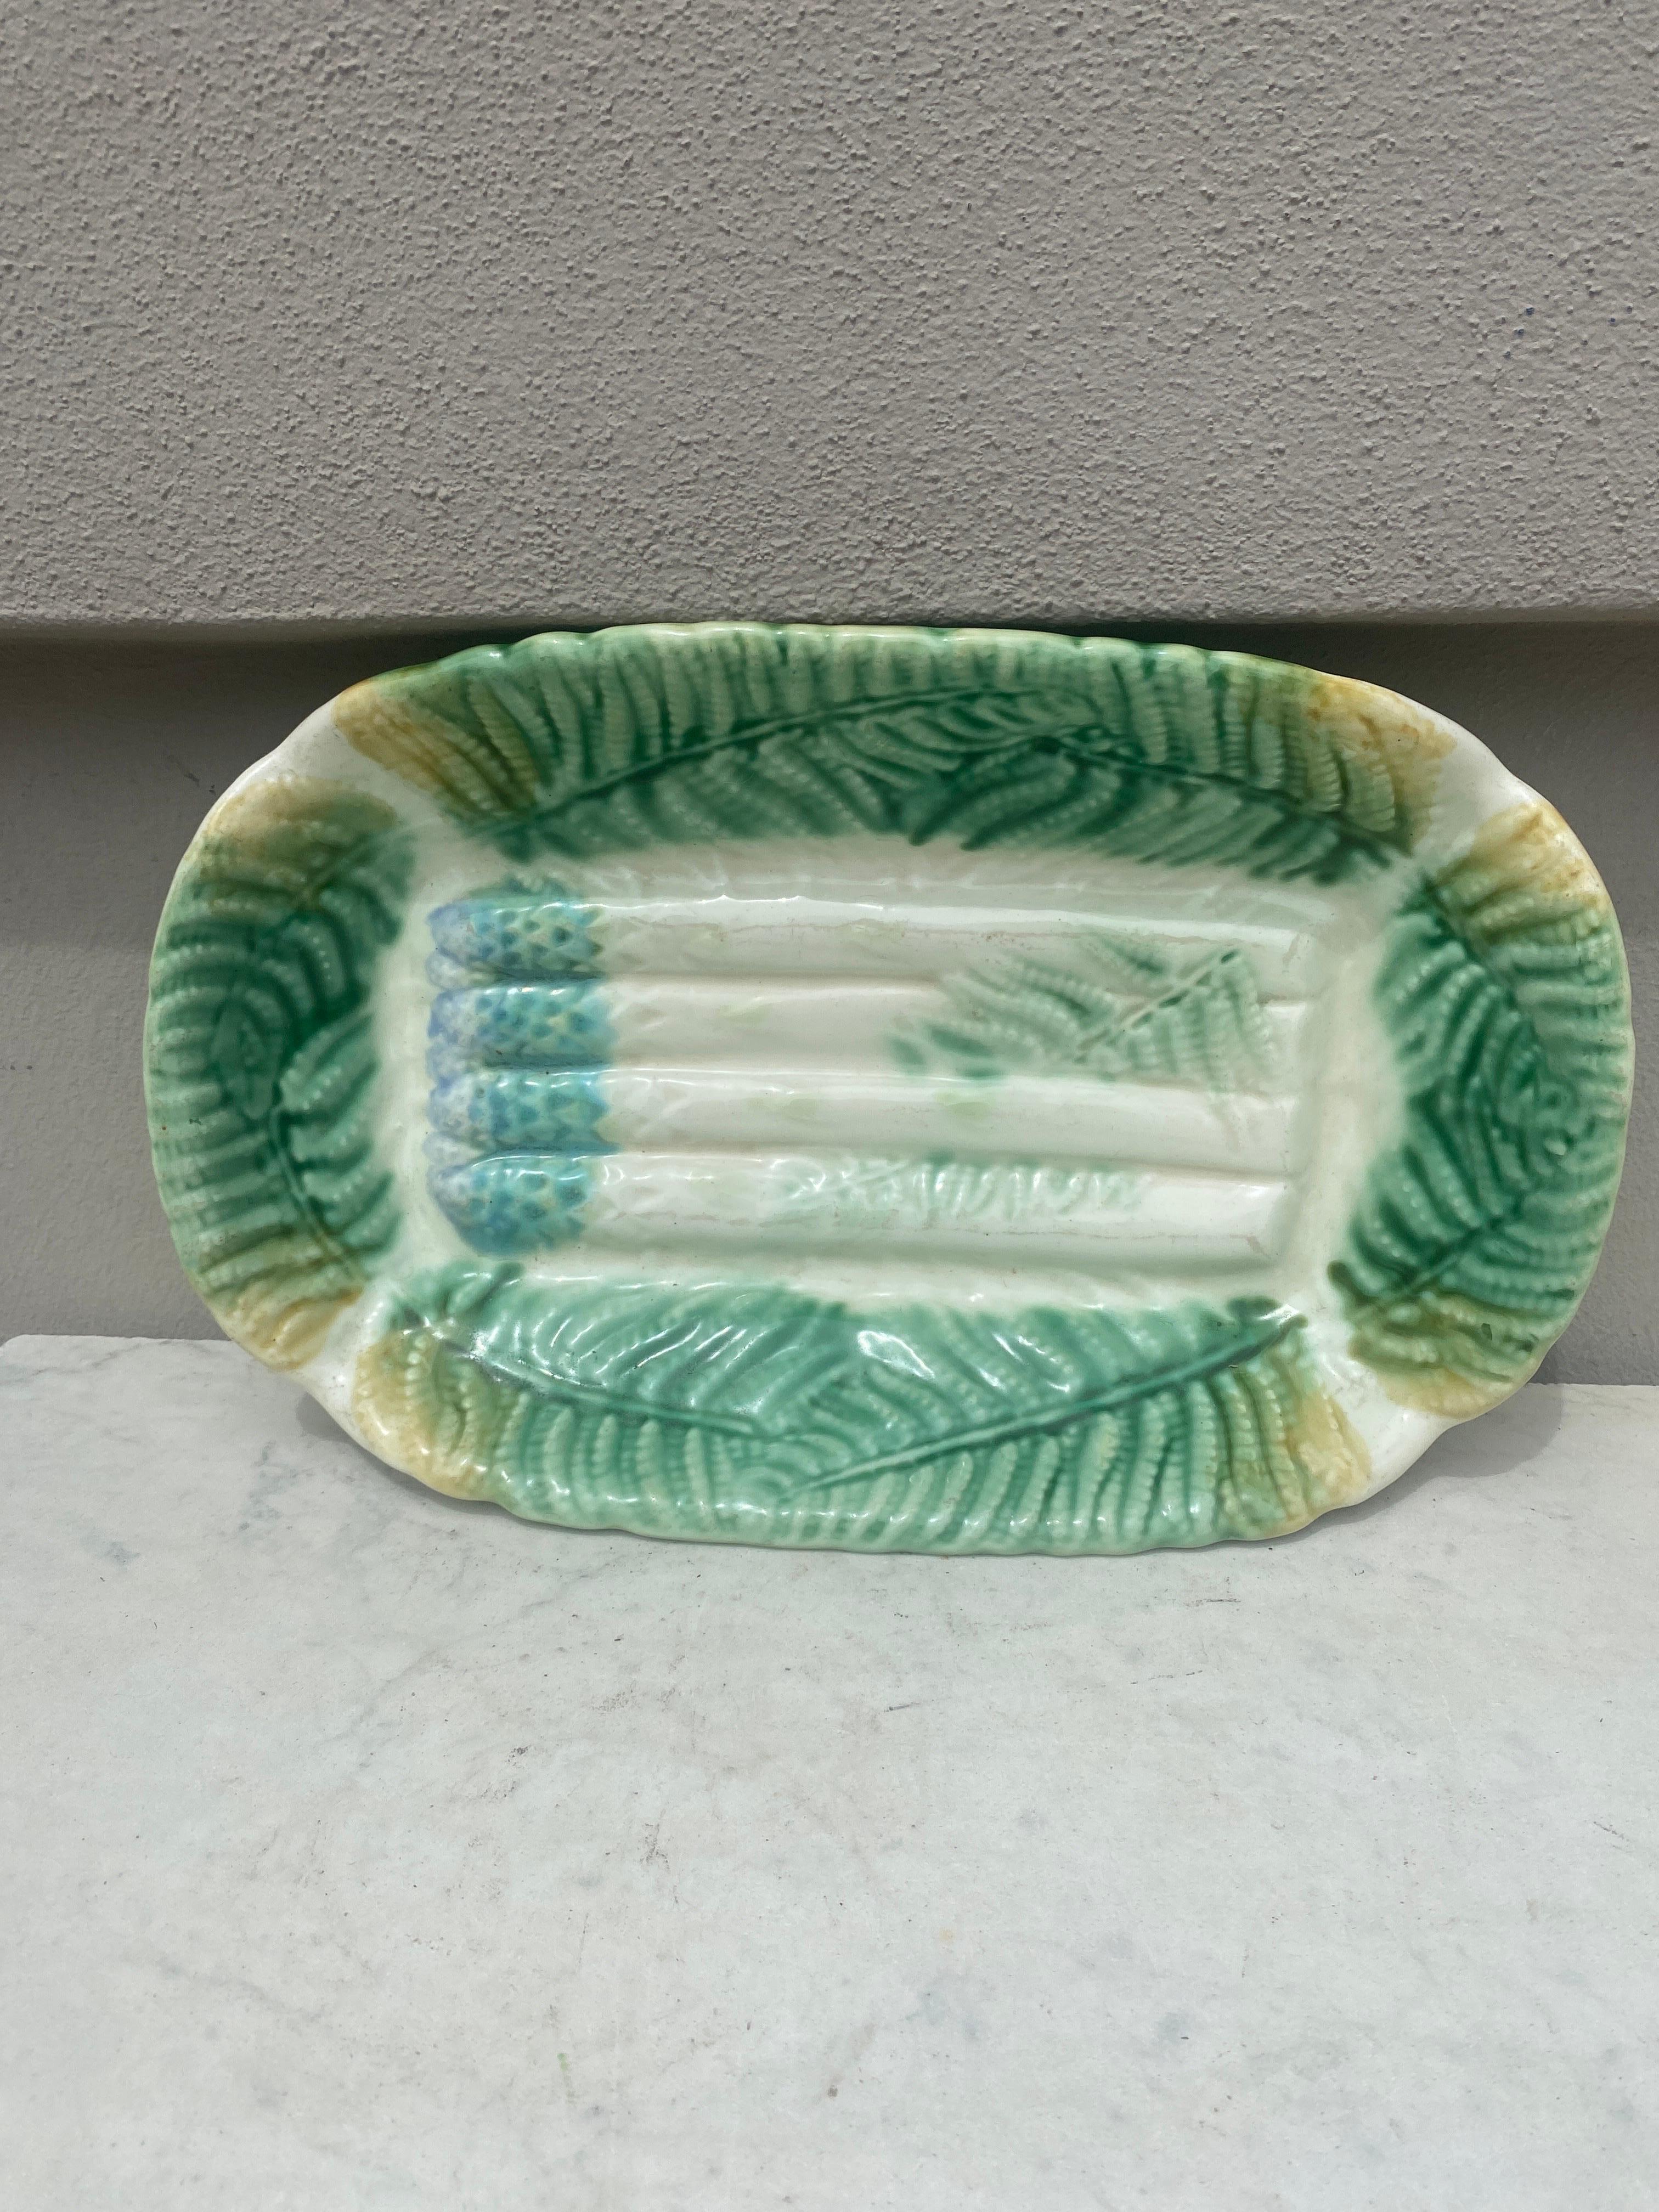 French Majolica asparagus platter Salins, circa 1880.
Decorated with ferns.